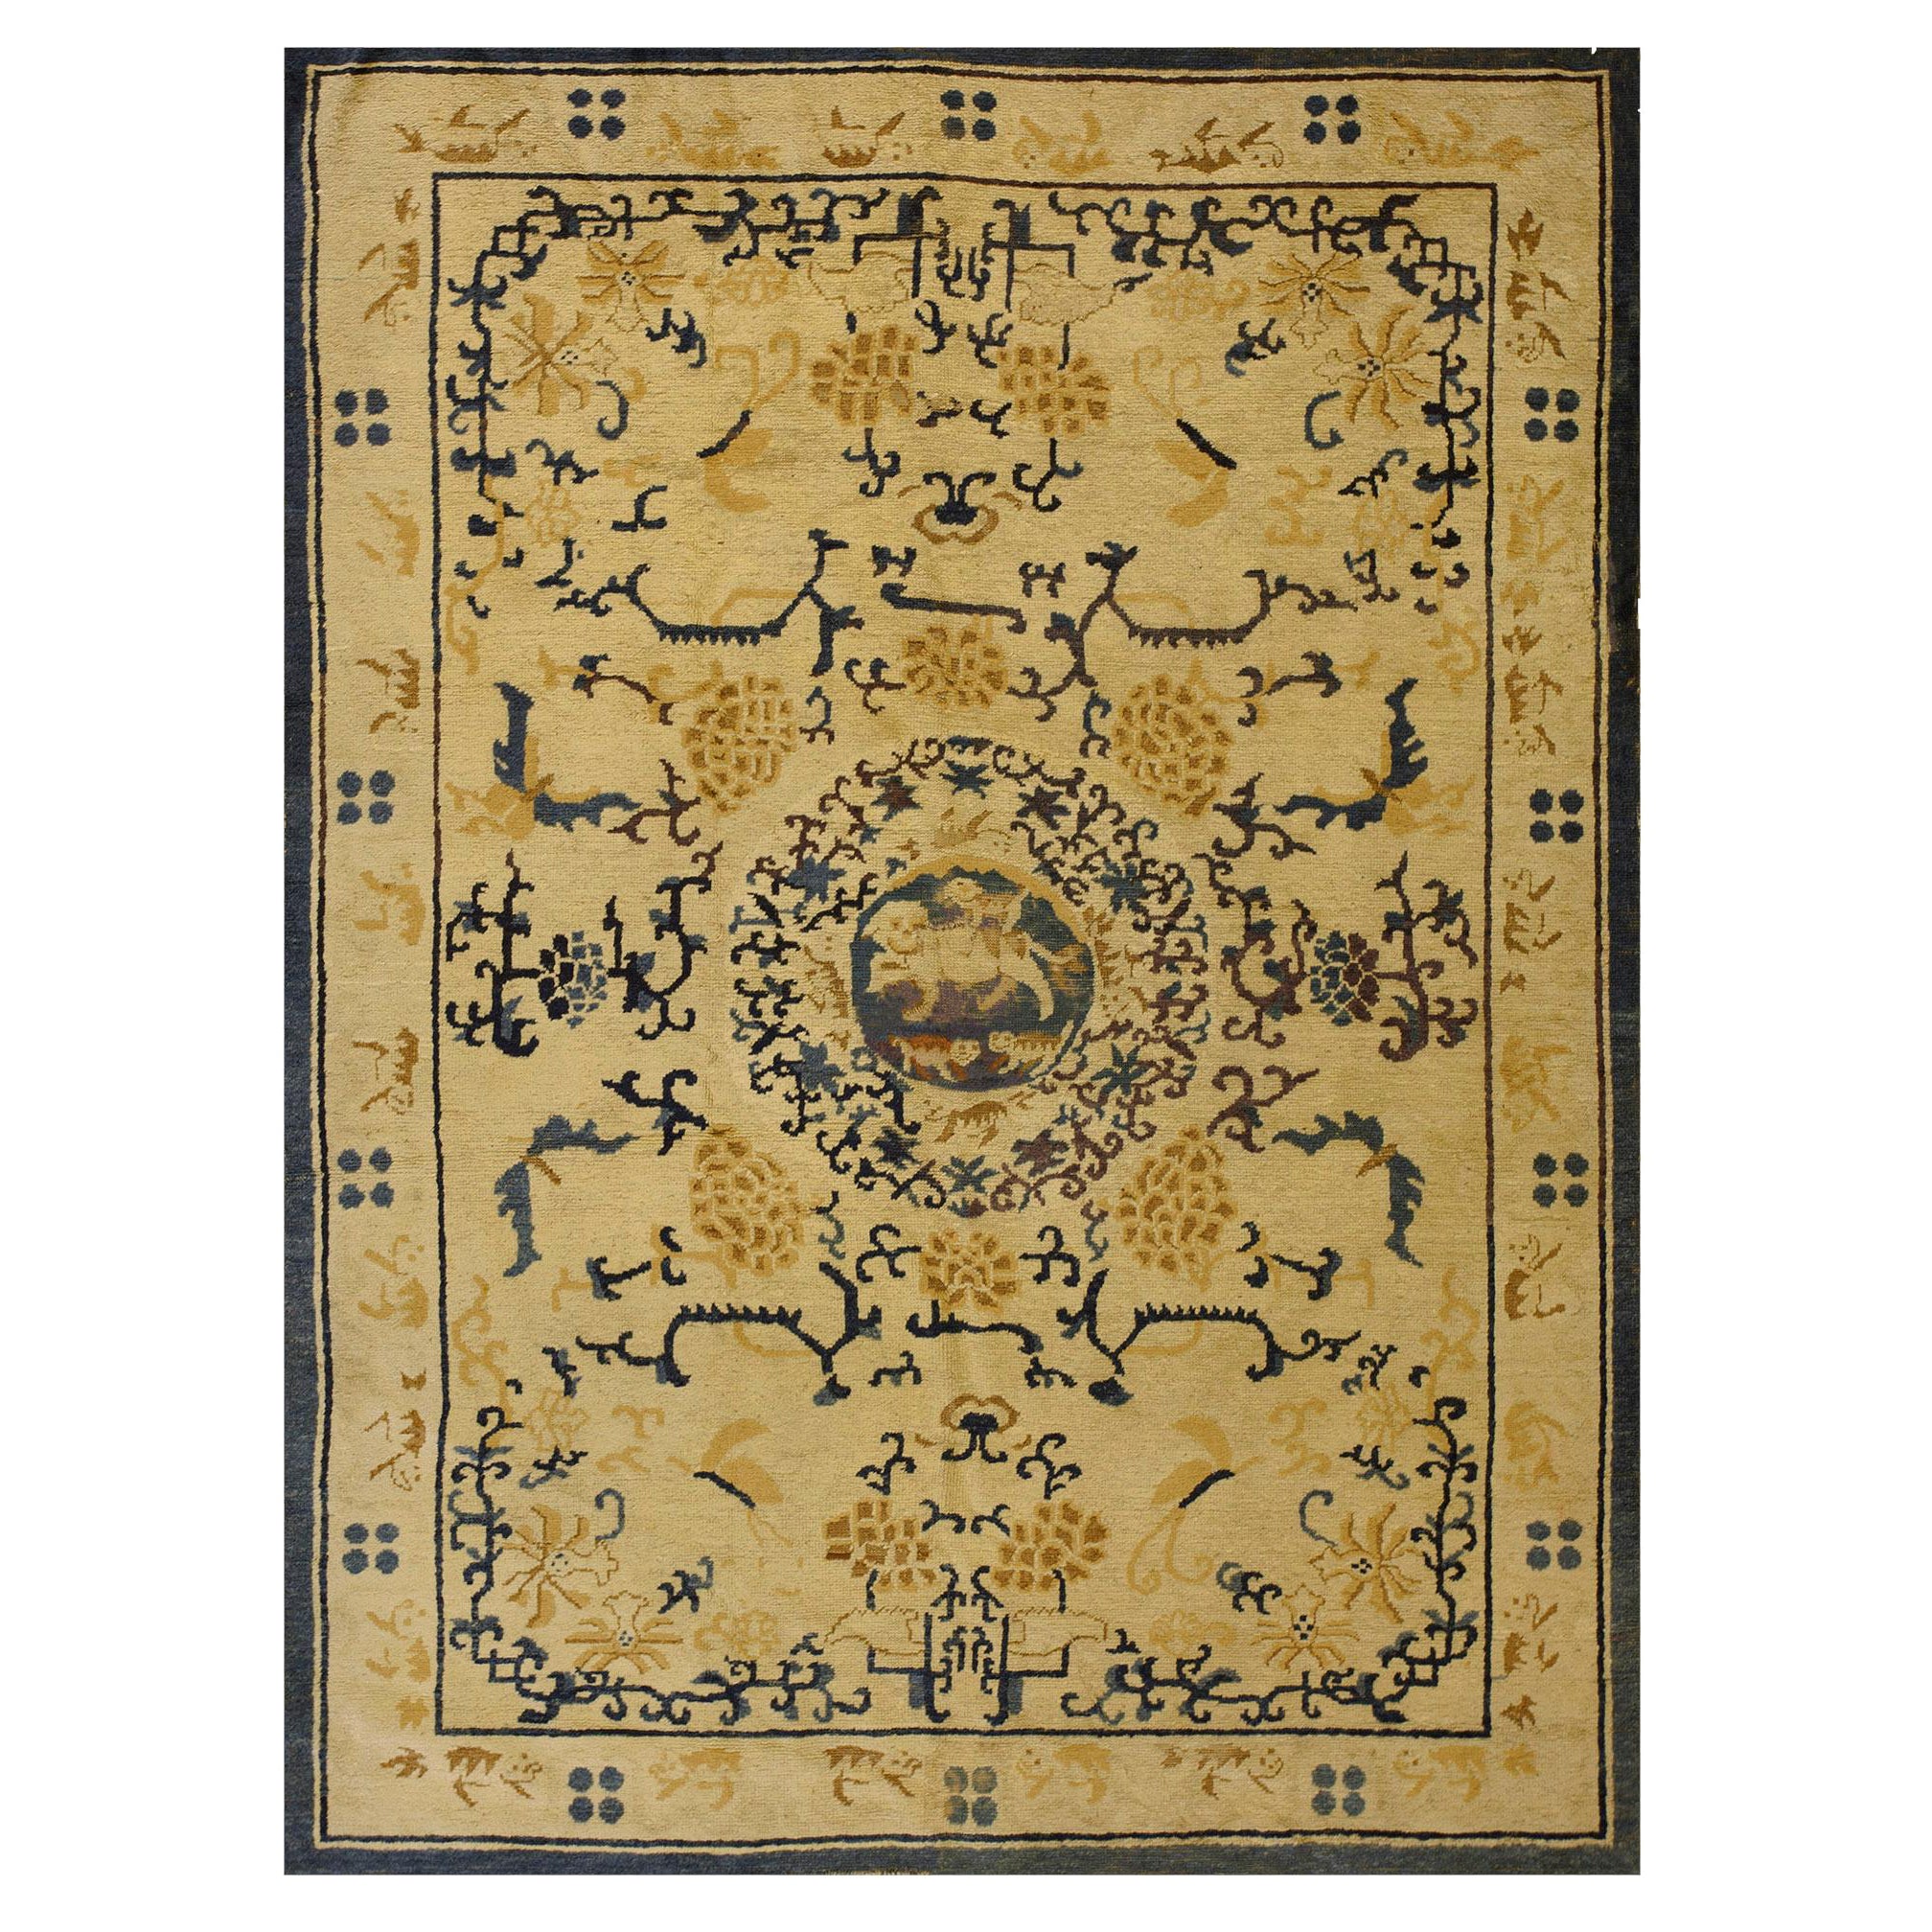 19th Century Chinese Ningxia Carpet ( 4' 10" x 6' 6" - 147 x 198 cm ) For Sale